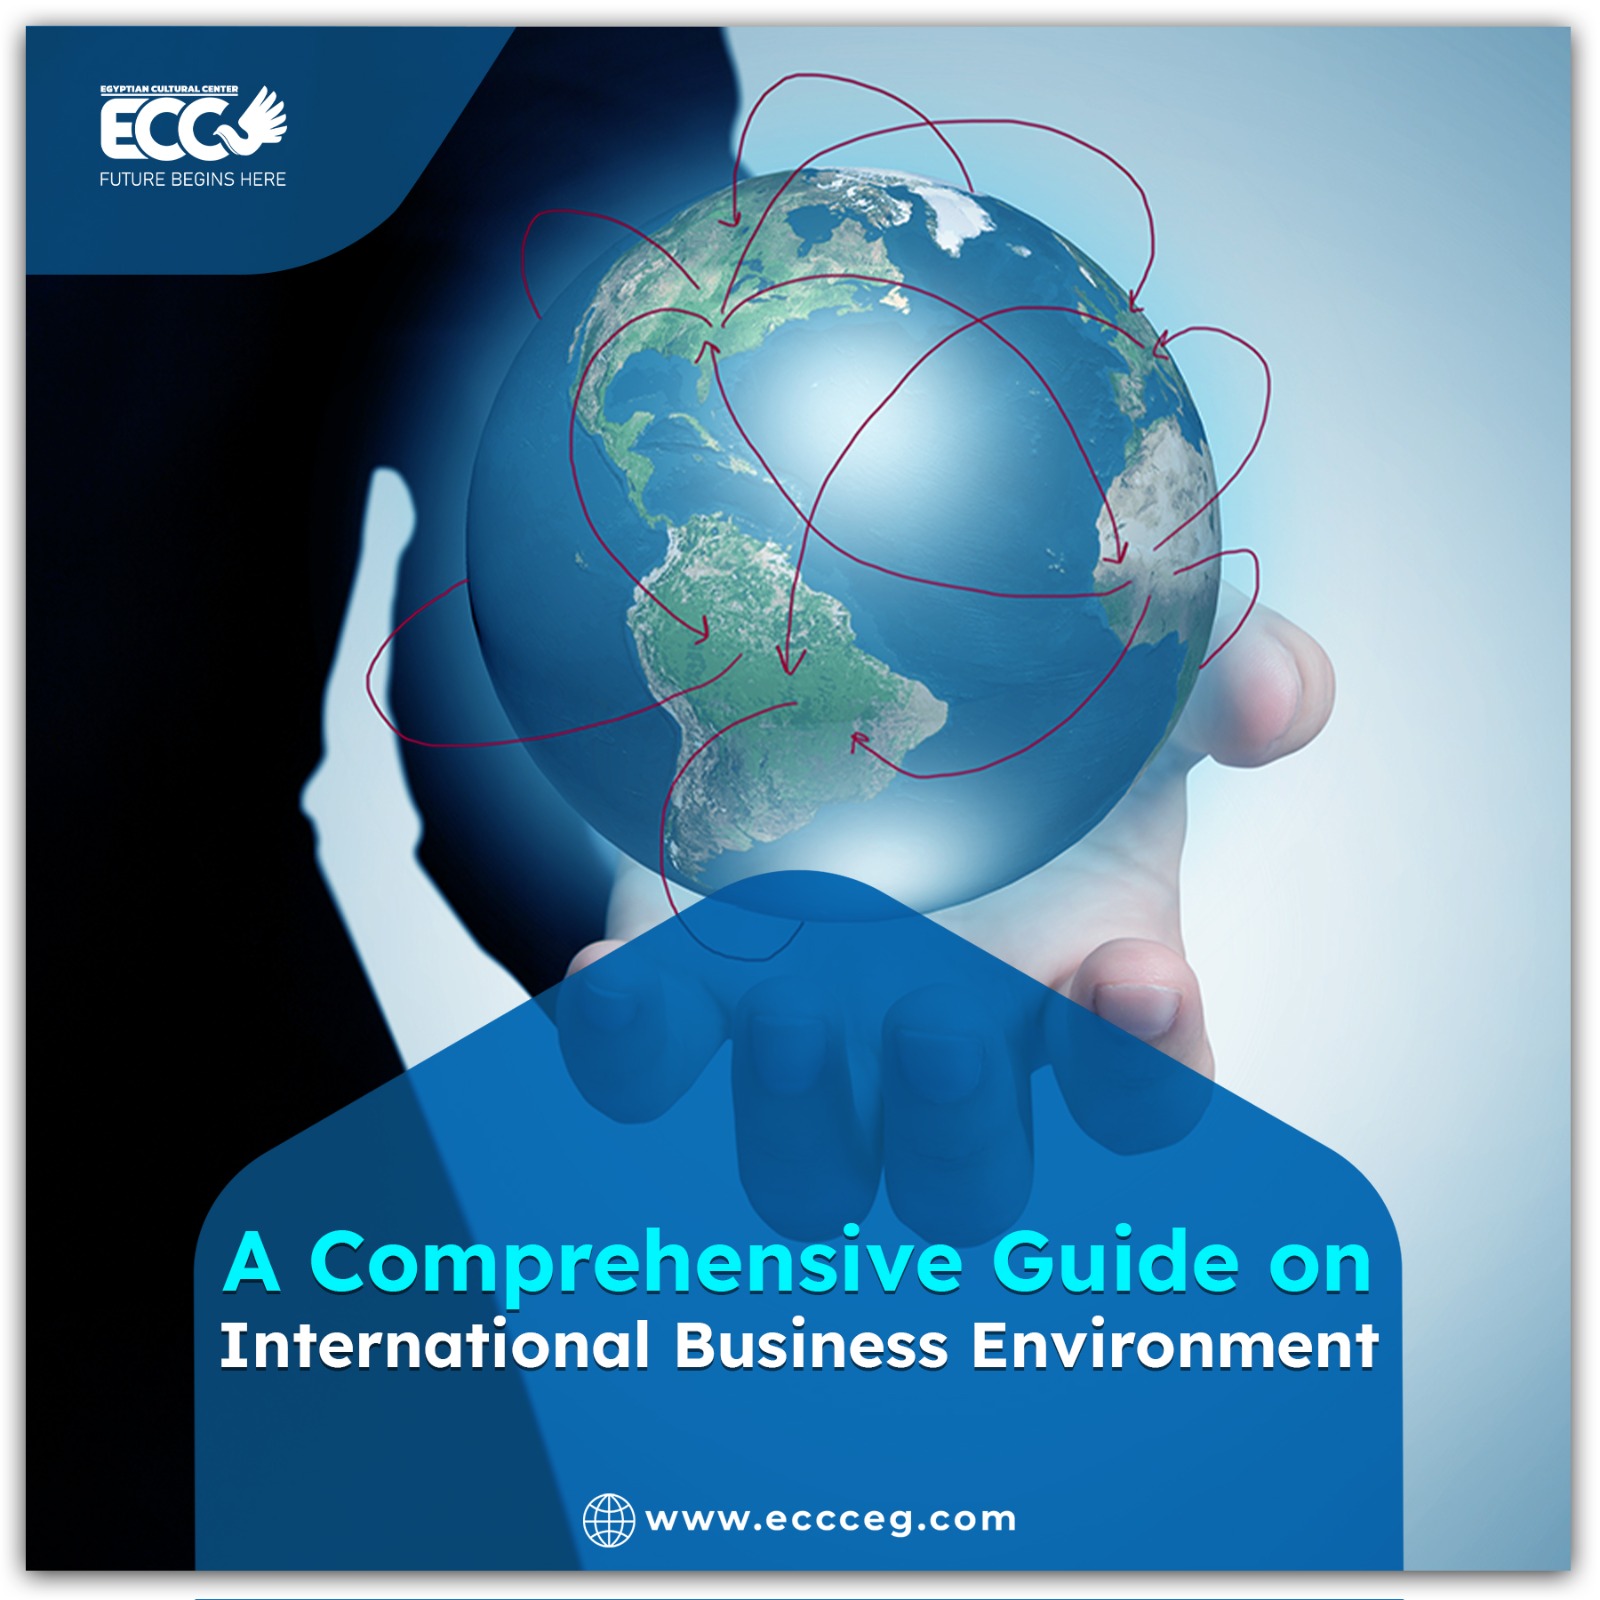 A comprehensive Guide on International Business Environment